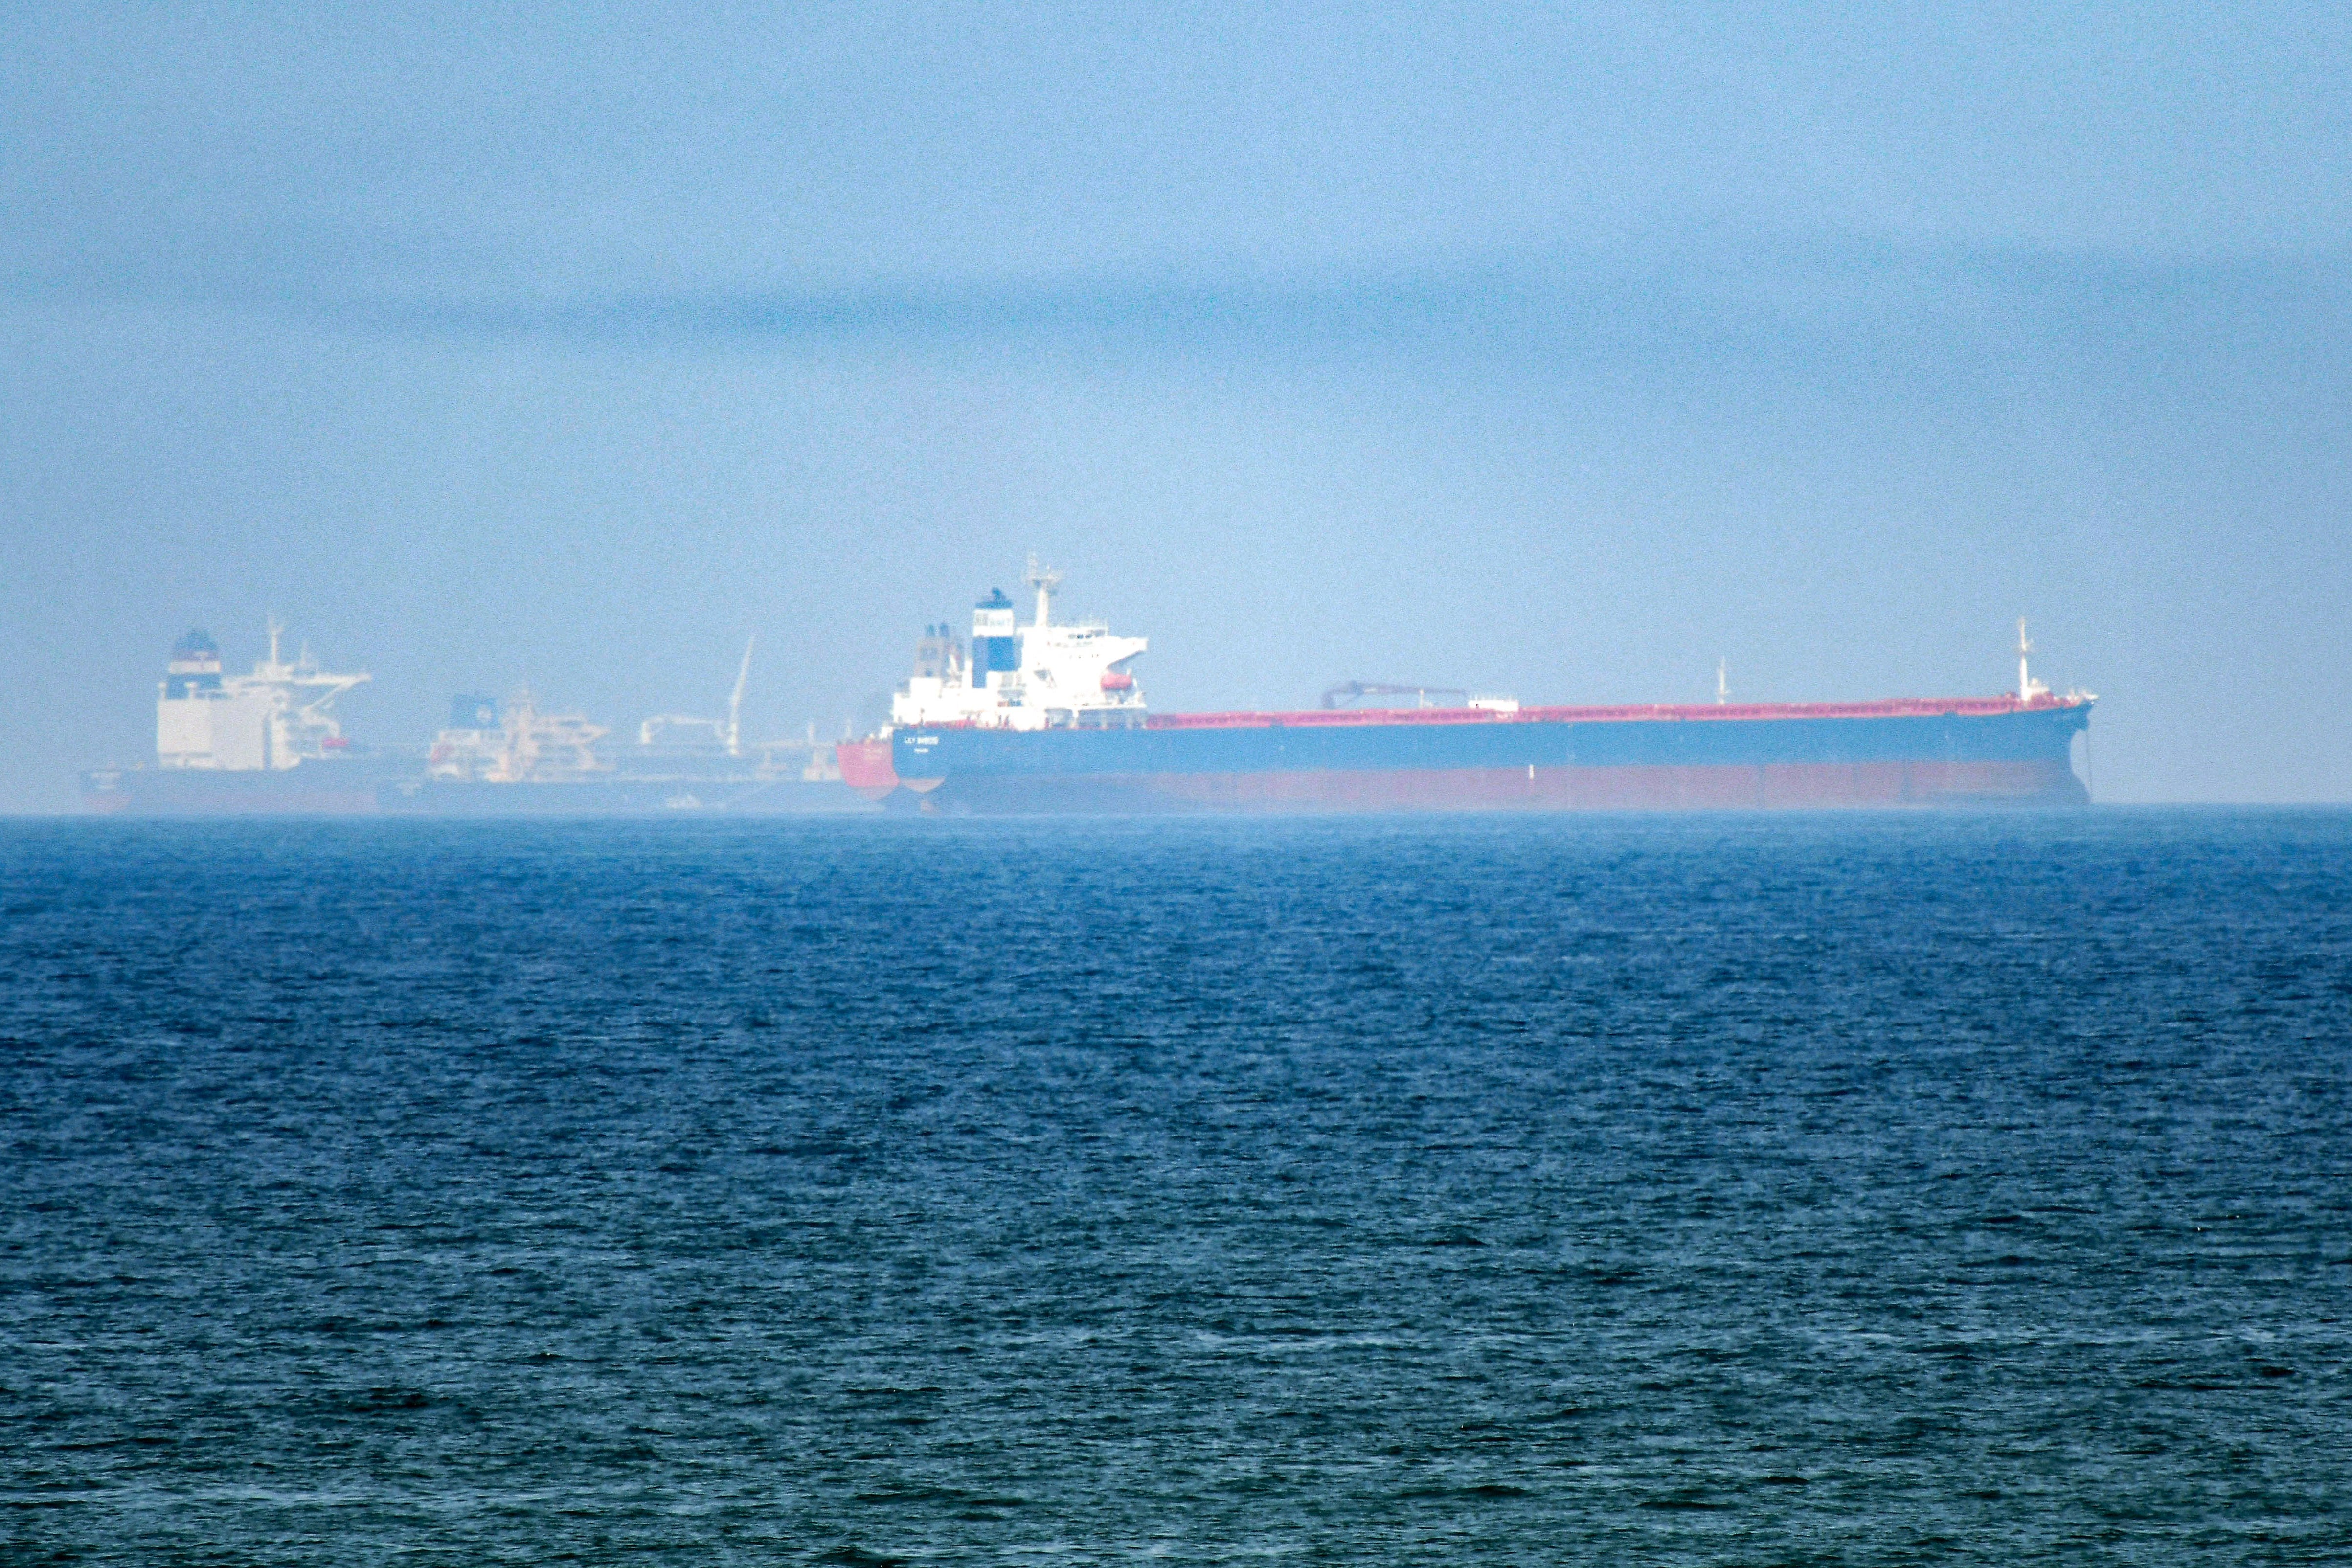 Tanker ships in the Gulf of Oman